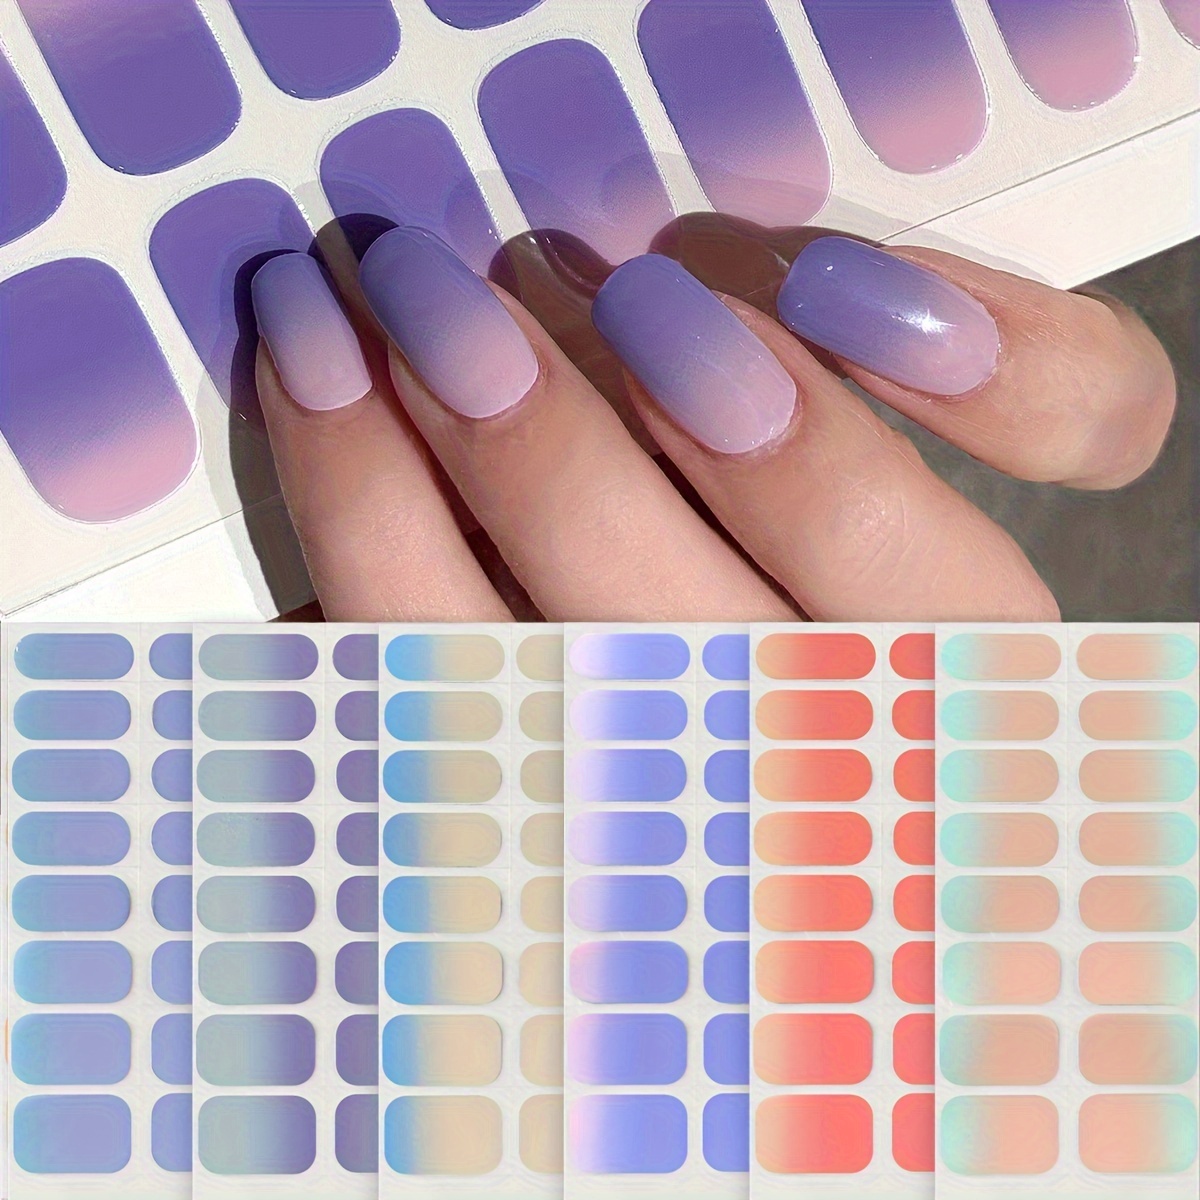 

6-piece Summer Gradient Nail Art Stickers Set + 3-piece Nail File Set - Self-adhesive, Shimmer Finish, No Scent